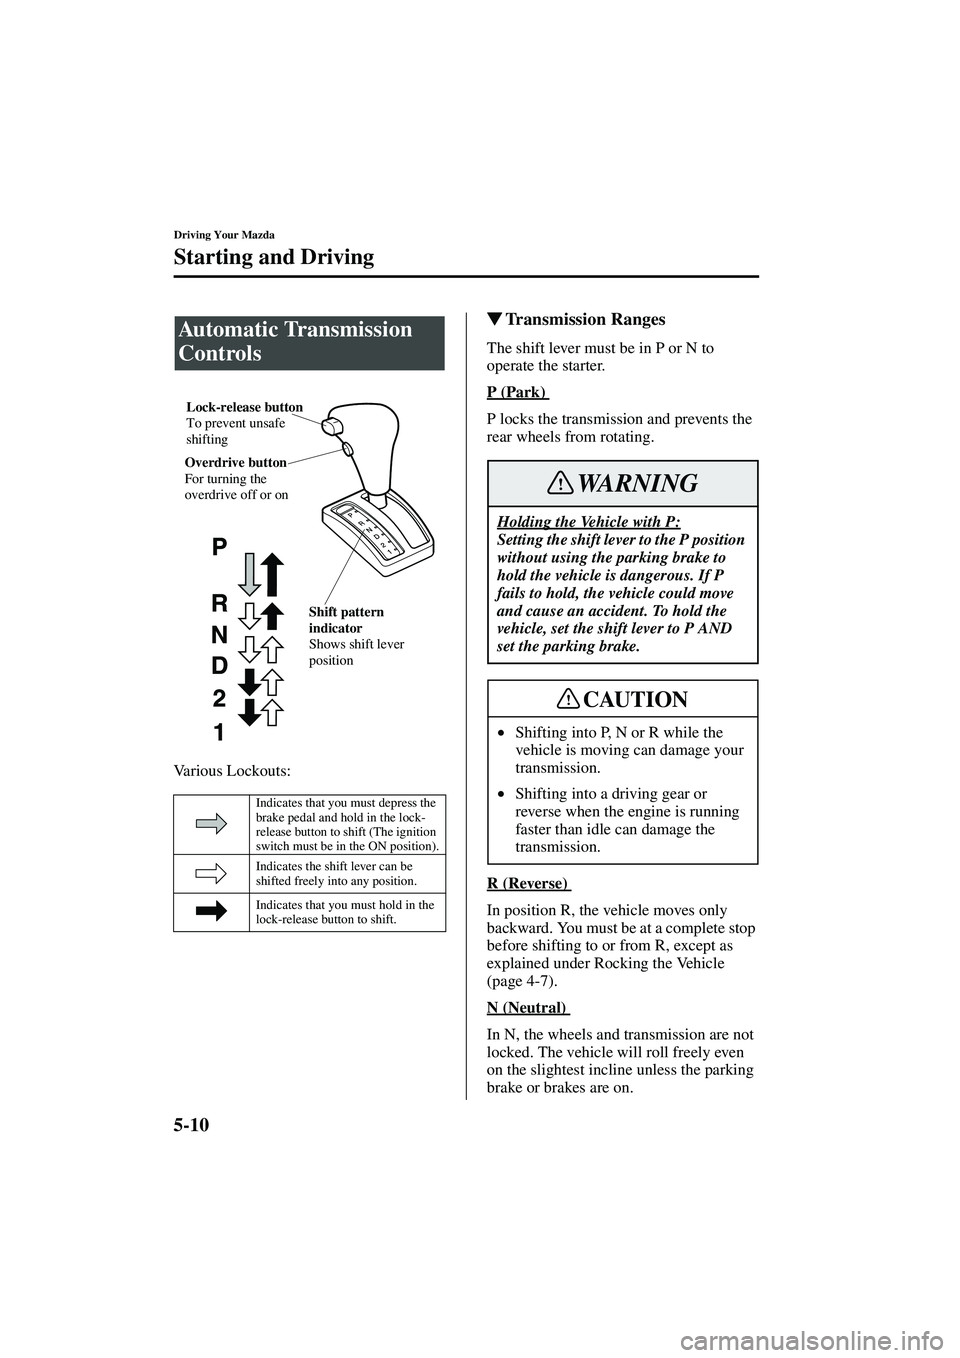 MAZDA MODEL MX-5 MIATA 2003 User Guide 5-10
Driving Your Mazda
Starting and Driving
Form No. 8R09-EA-02G
Various Lockouts:
Transmission Ranges
The shift lever must be in P or N to 
operate the starter.
P (Park) 
P locks the transmission a